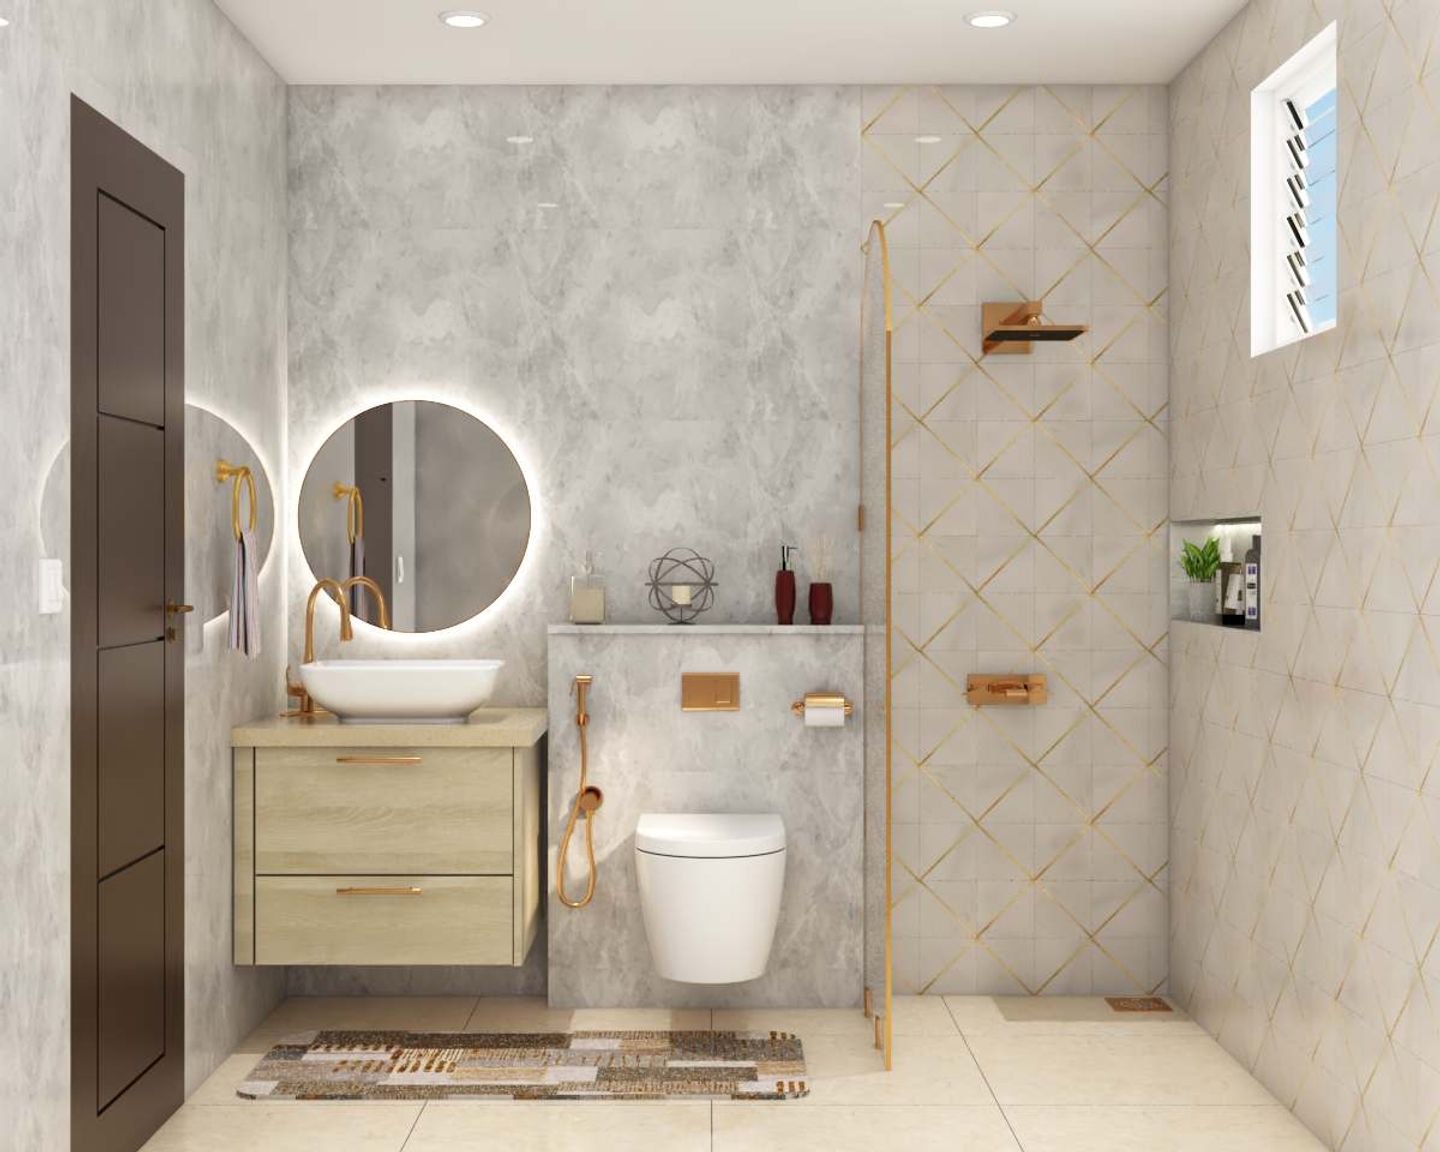 Classic Bathroom Design with Brass Fittings - Livspace